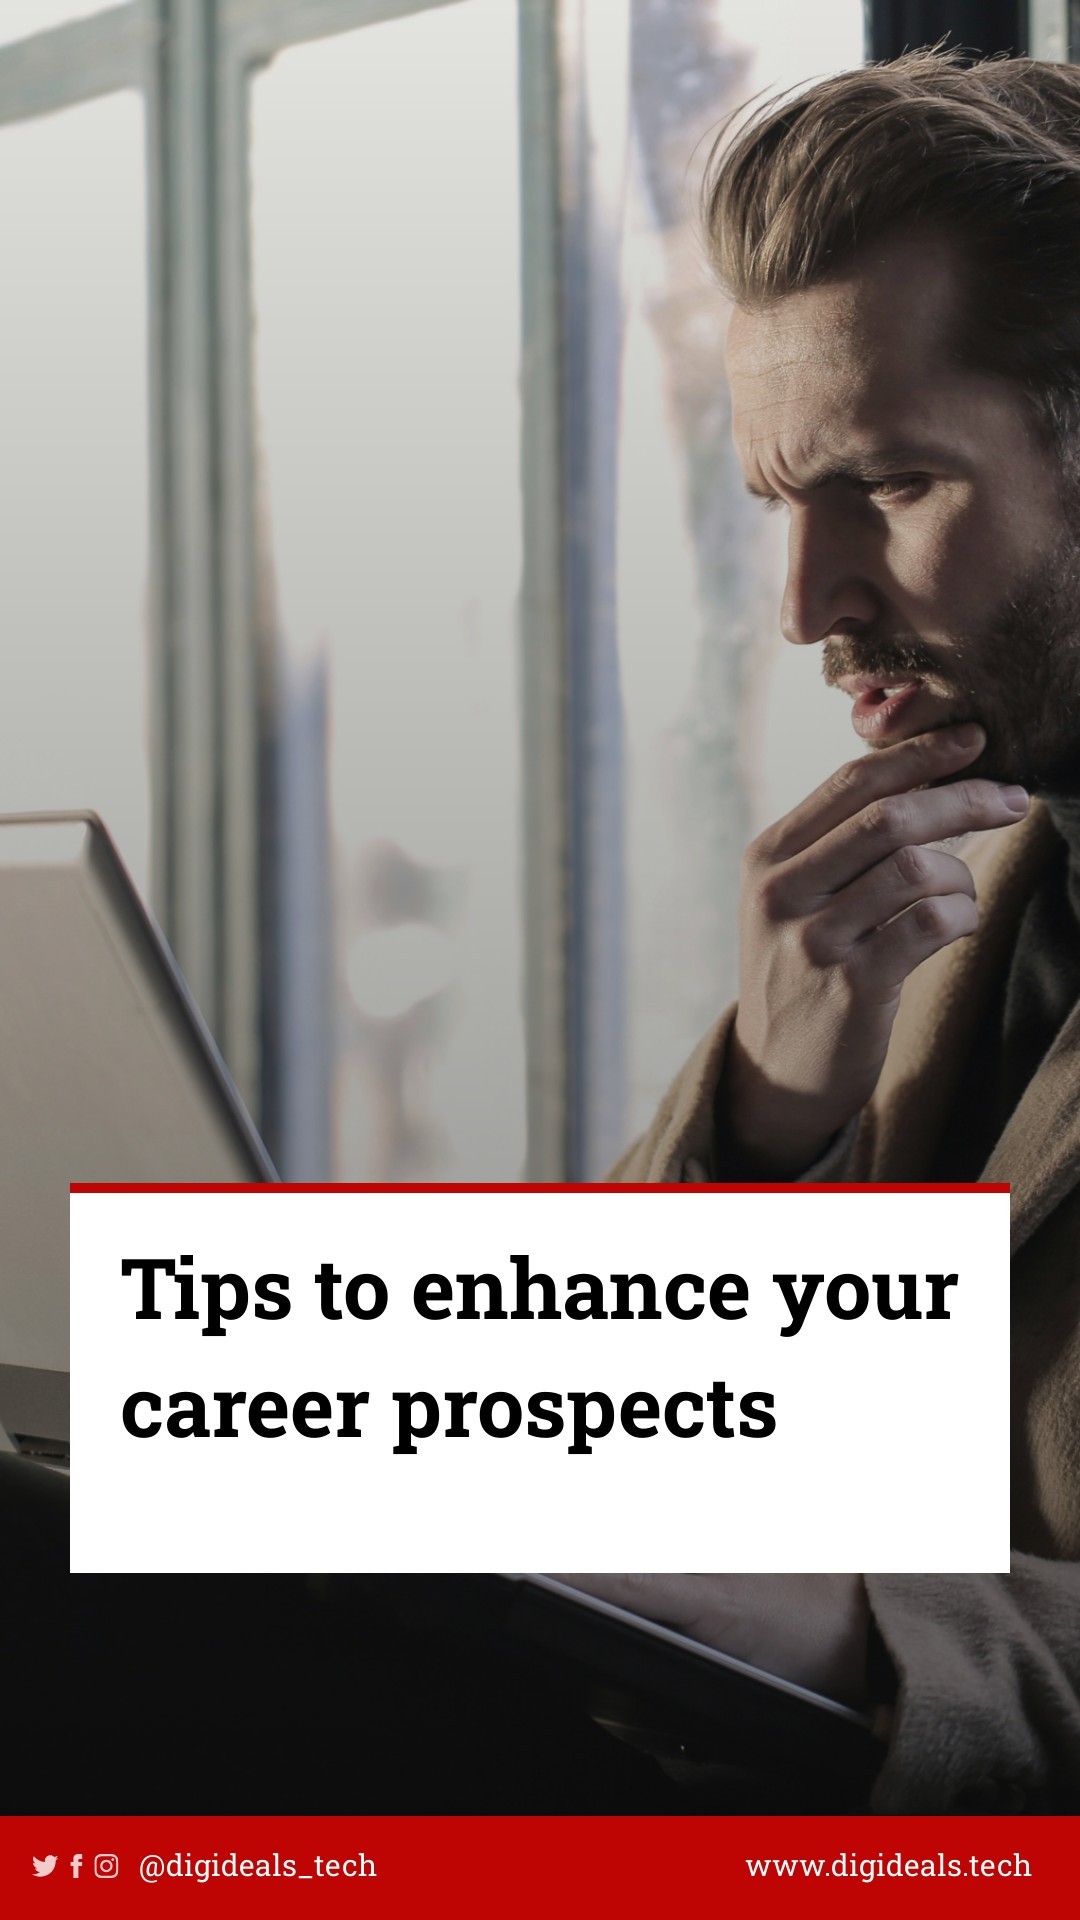 Tips to enhance your career prospects